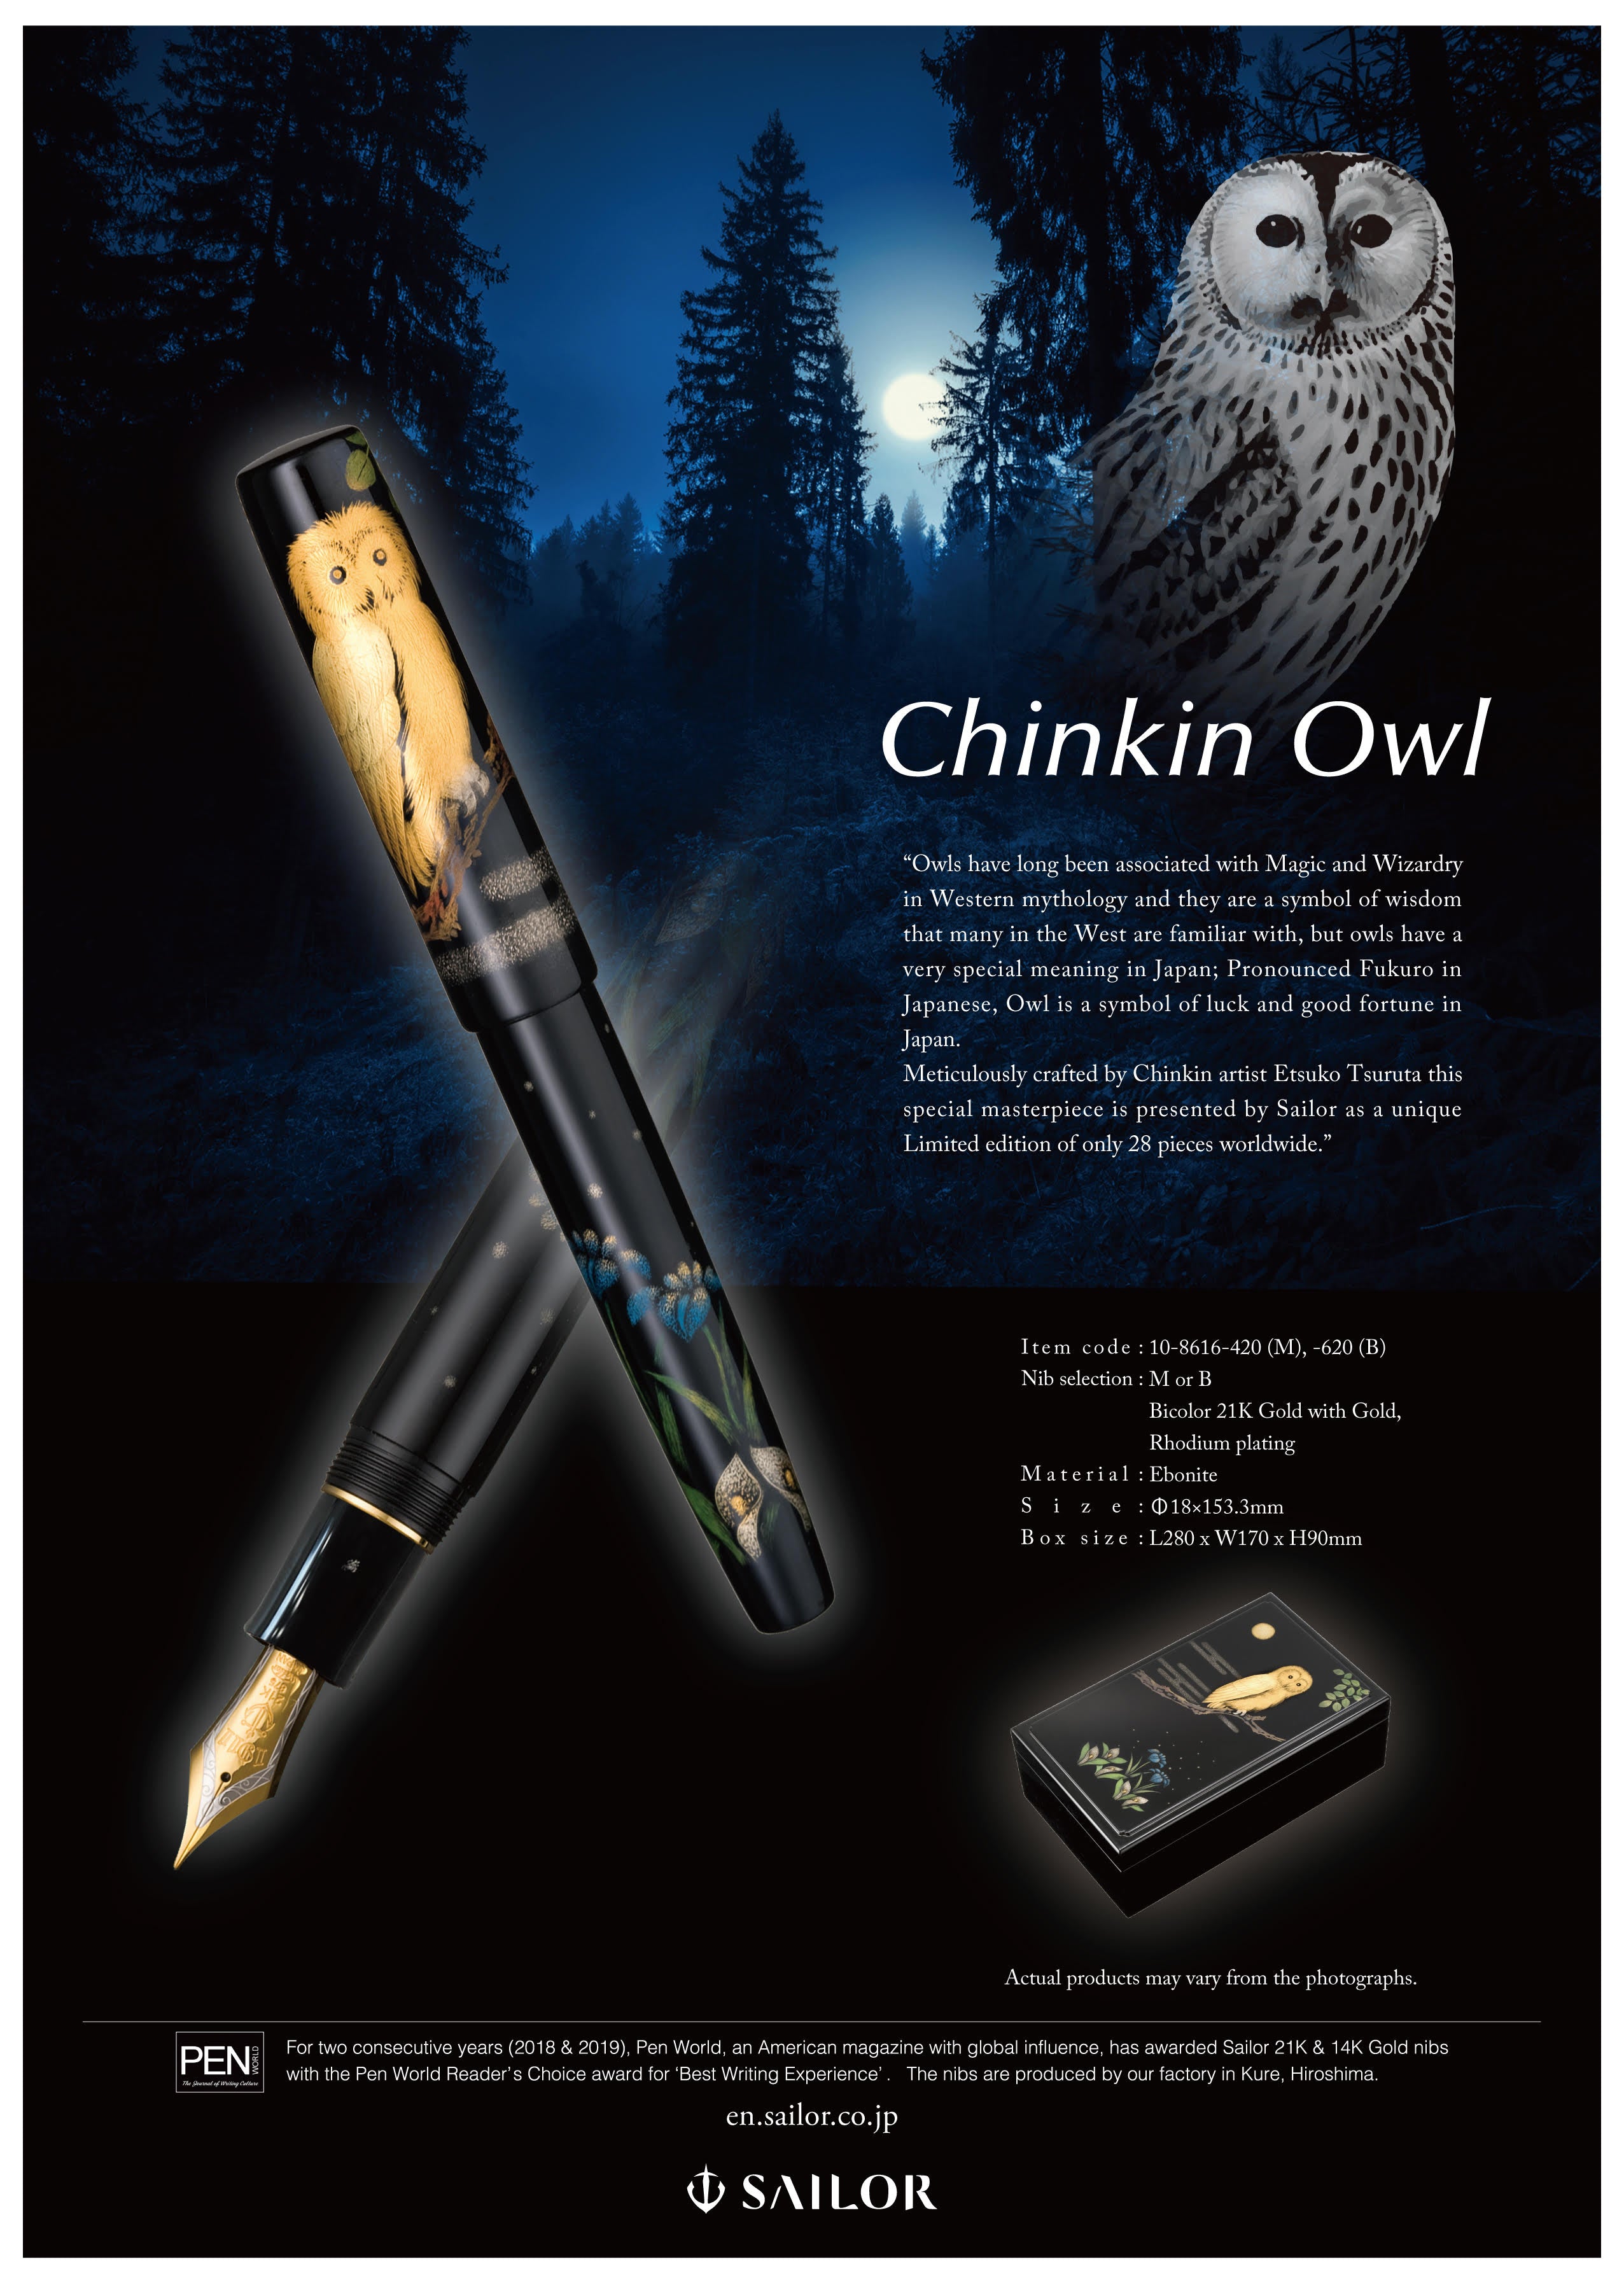 Sailor's New Limited Edition Anime-Inspired Pen - The Pen Company Blog